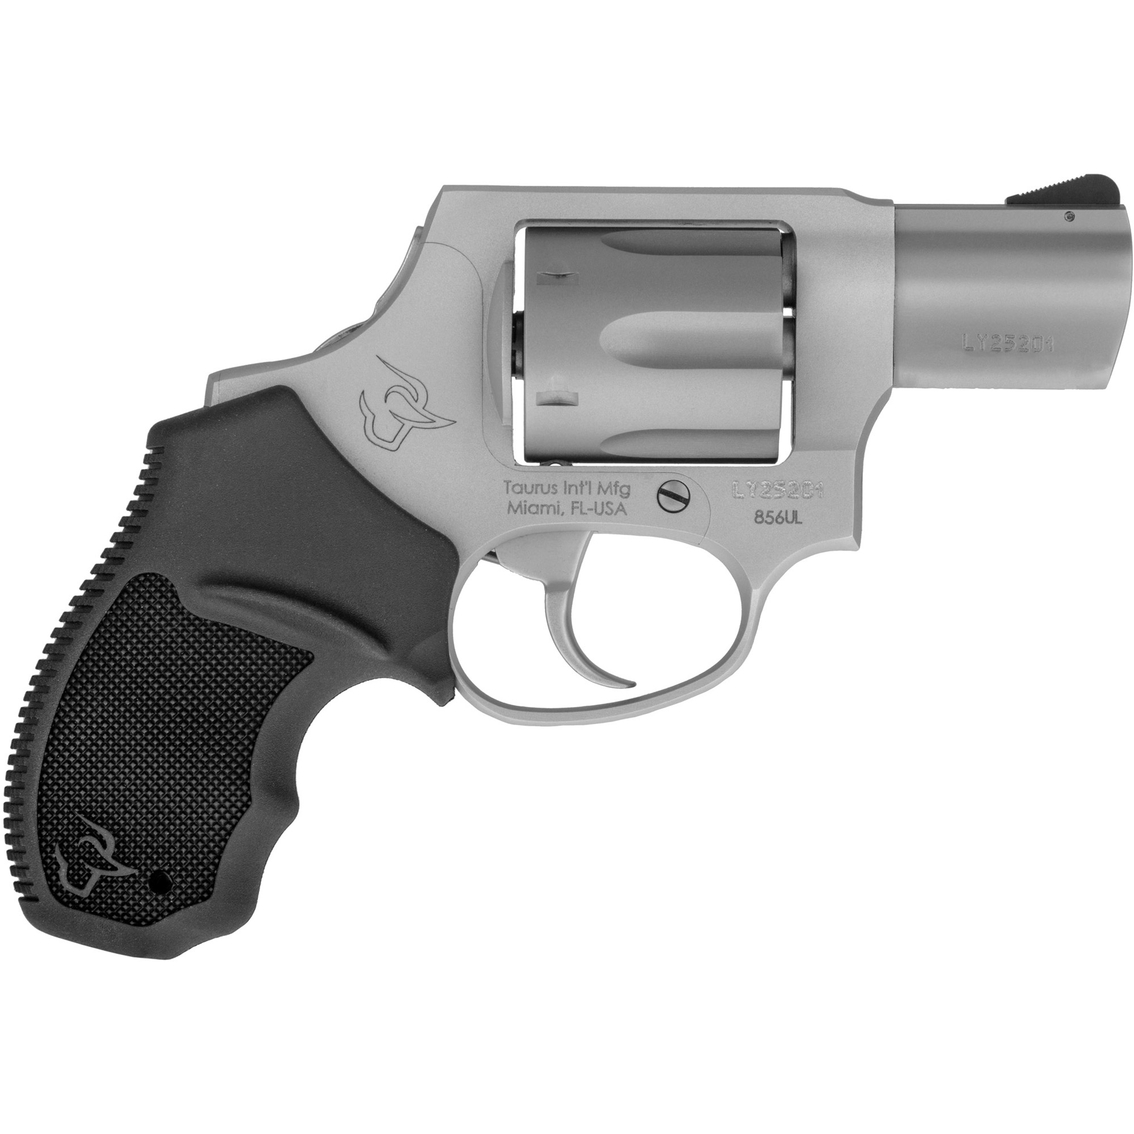 Taurus 856ch Lite 38 Special 2 In. Barrel With Bobbed Hammer 6 Rnd ...